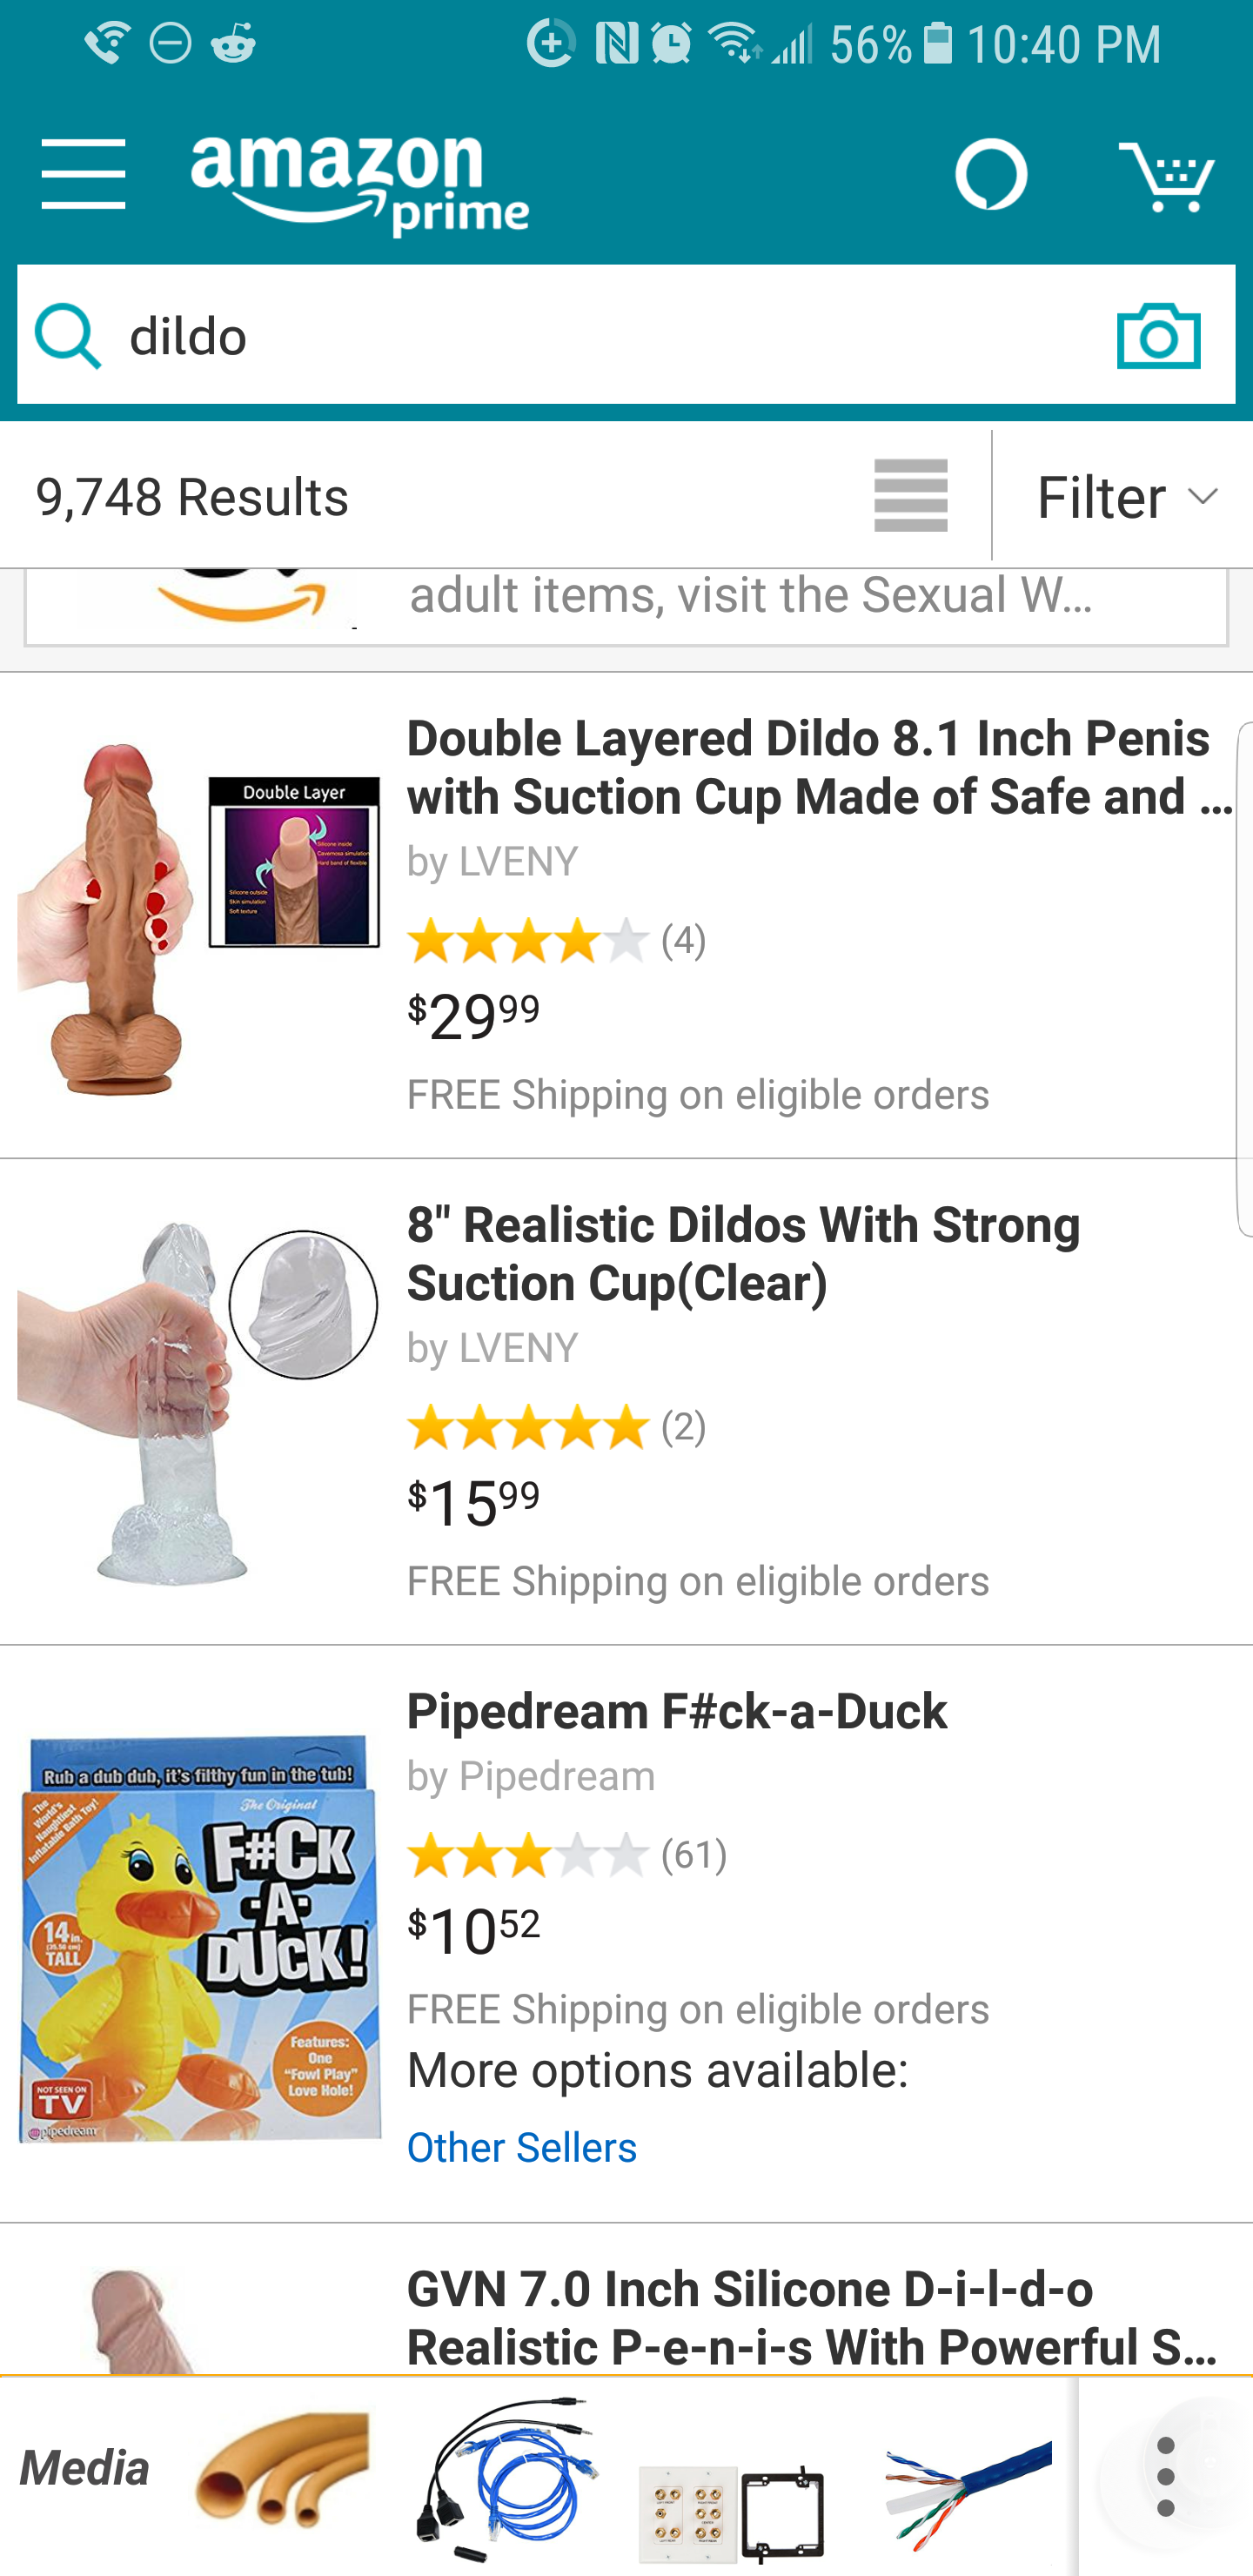 Wife complained about her targeted ads on Facebook showing my data and media list from Amazon. So, I spent the last hour clicking on Dildos.